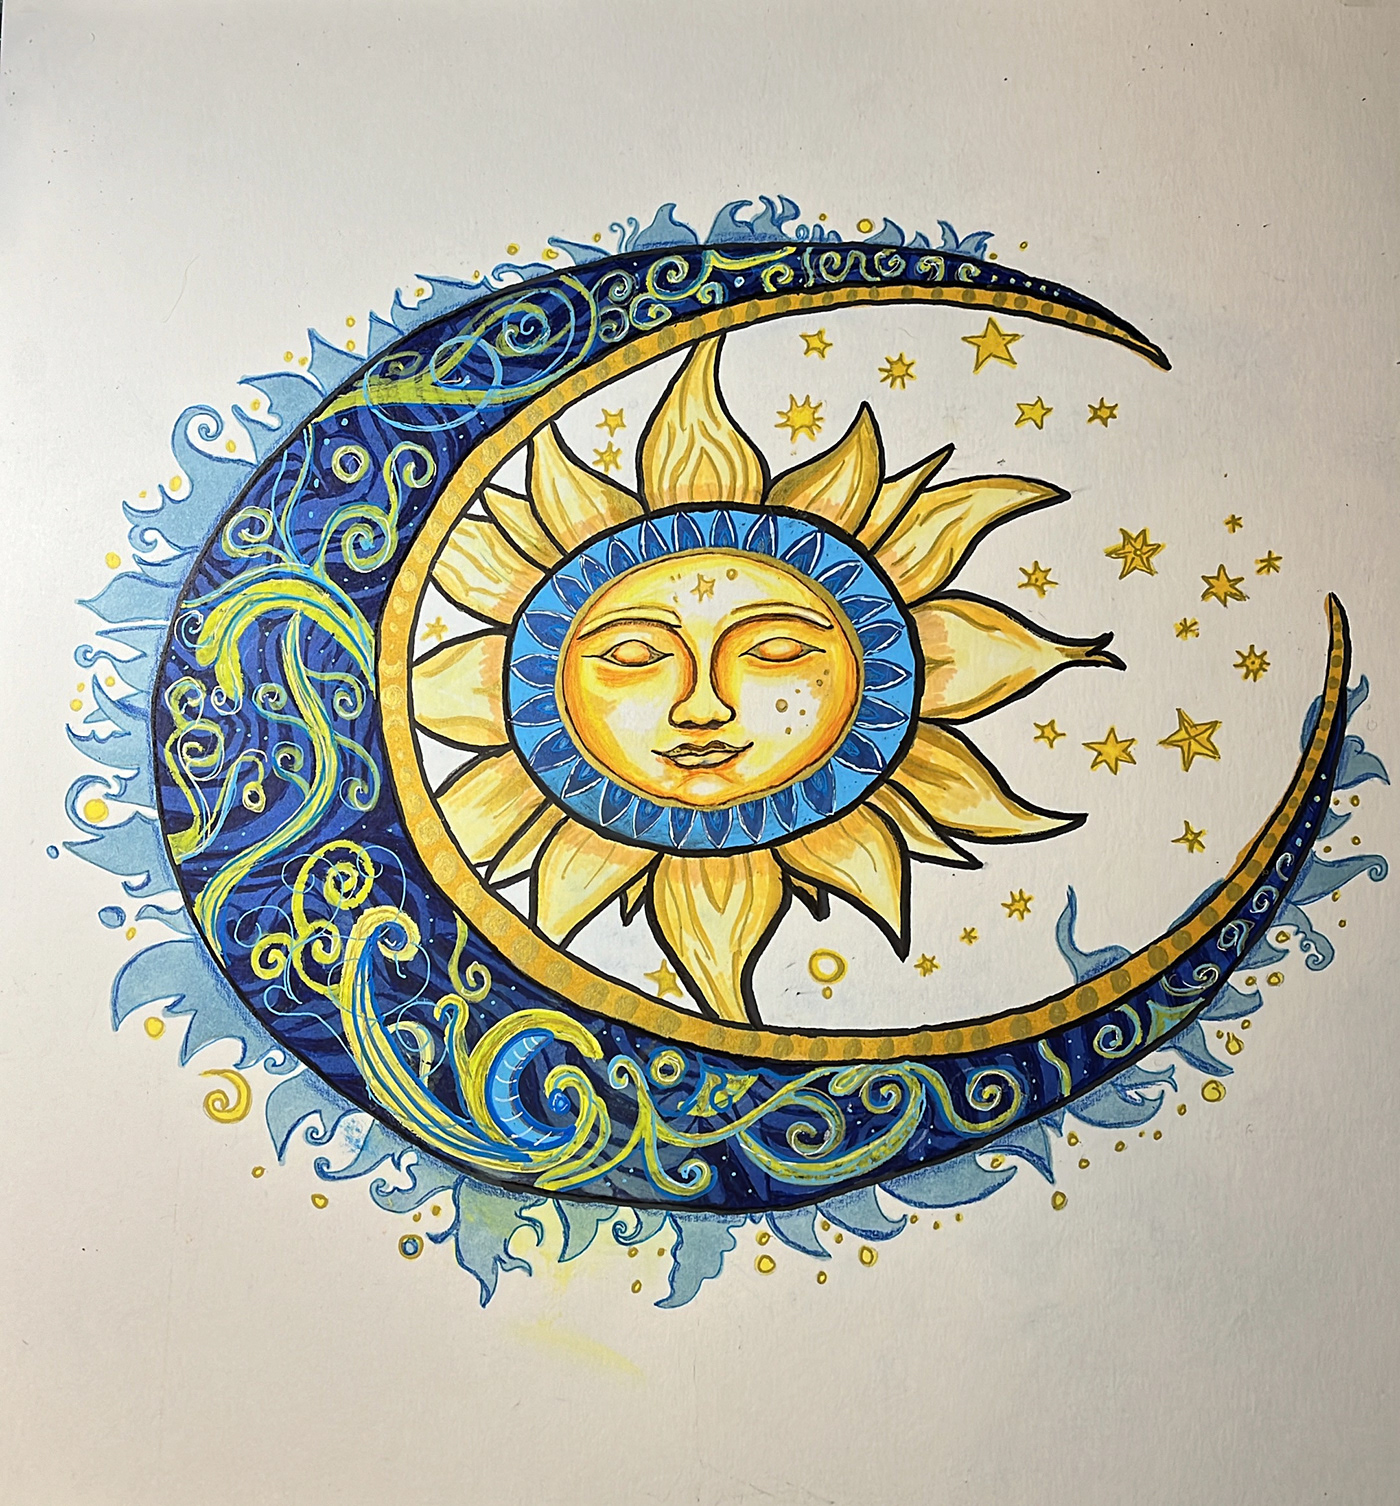 Sun moon prismacolor colored pencils markers Drawing  cbs sunday blue yellow White black alcohol markers gel pens